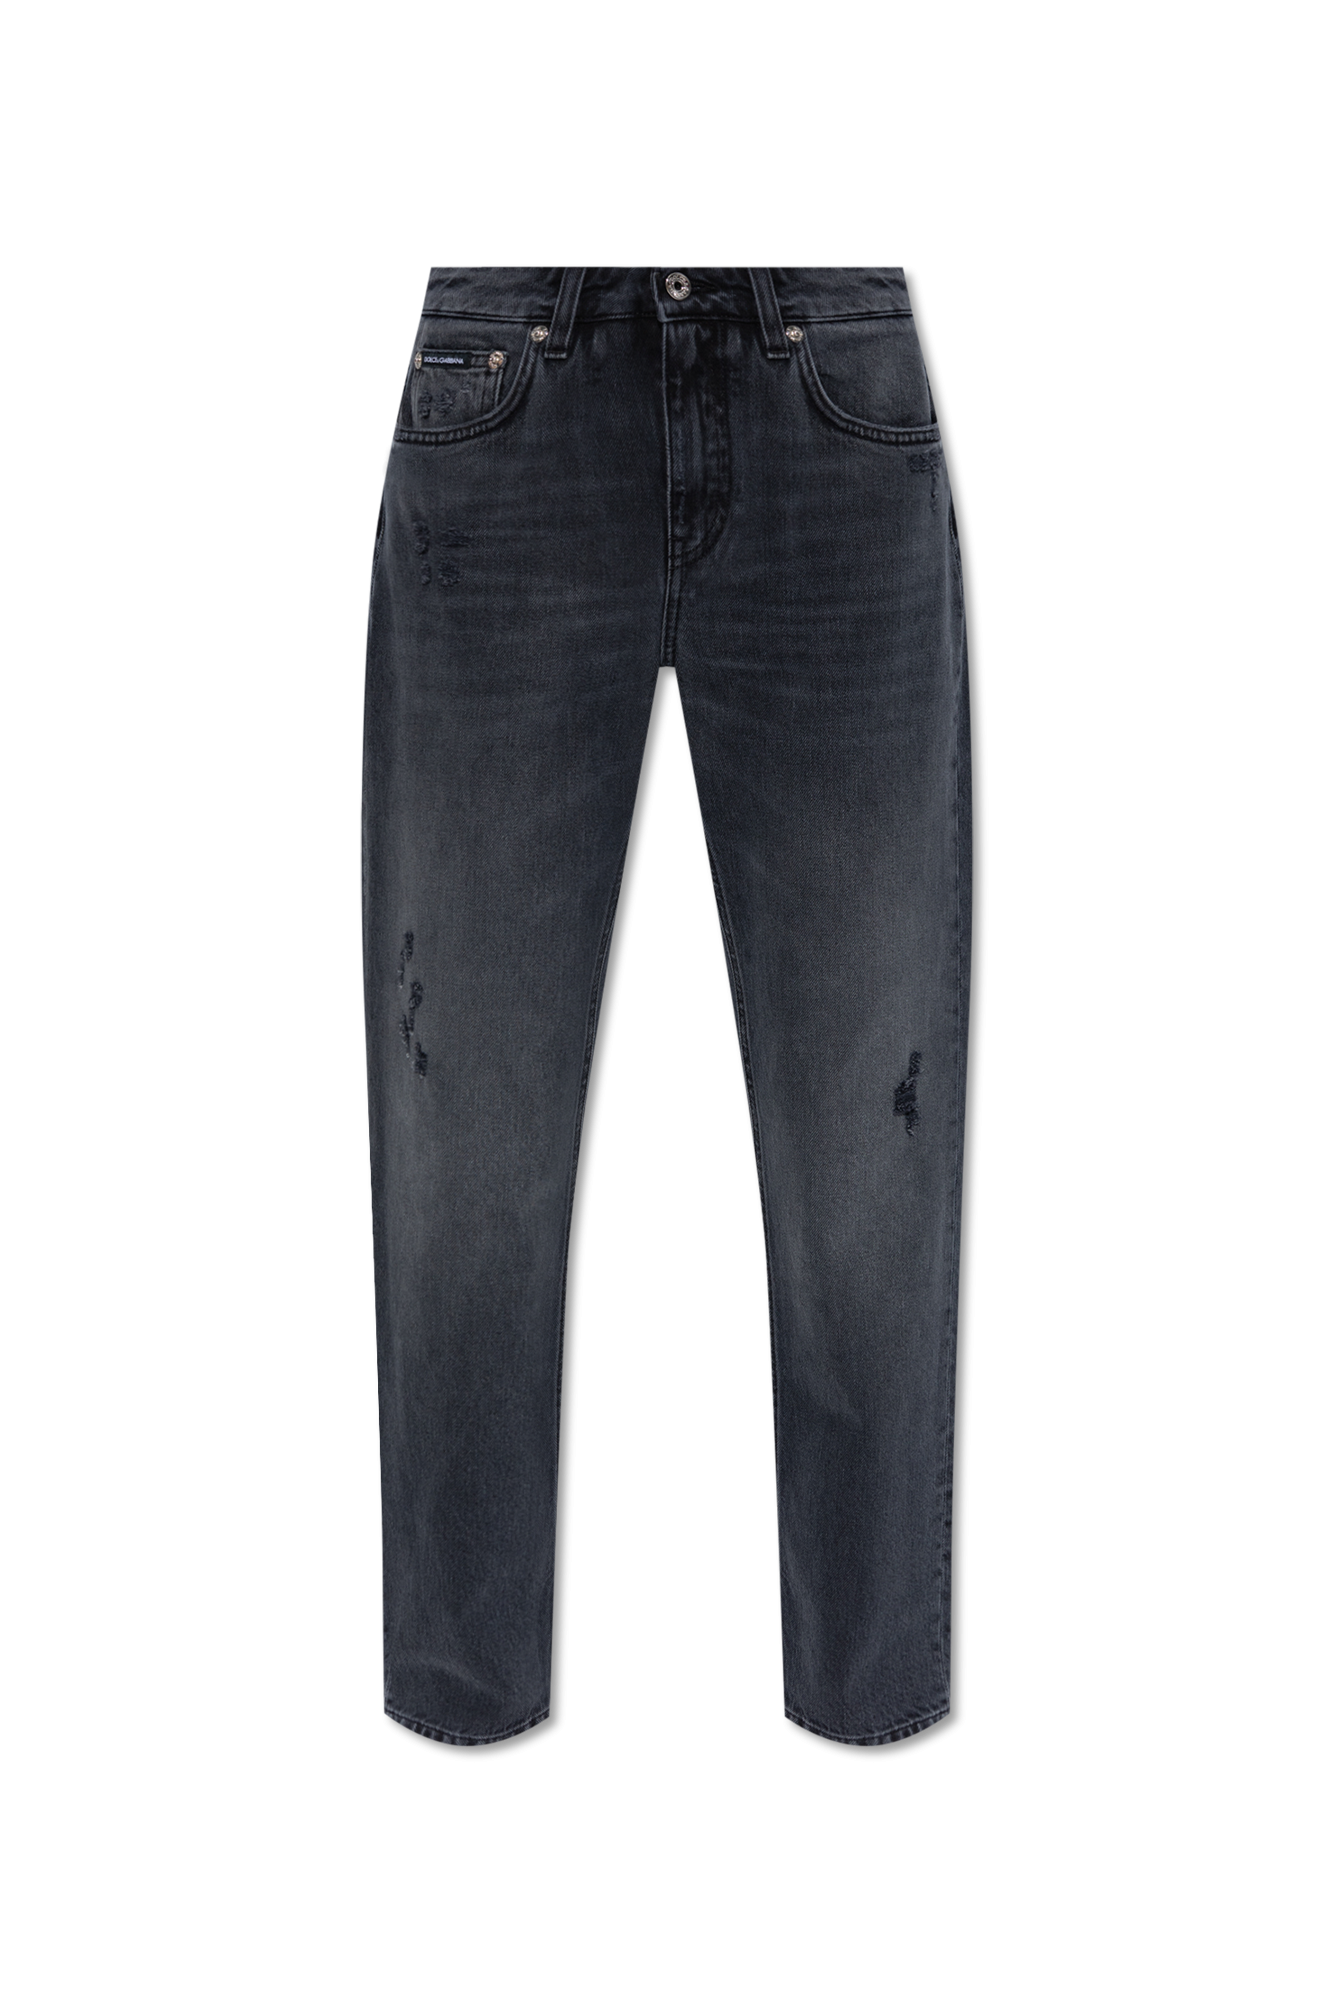 Dolce & Gabbana trousers with coercive zippers dolce gabbana trousers ftcbst